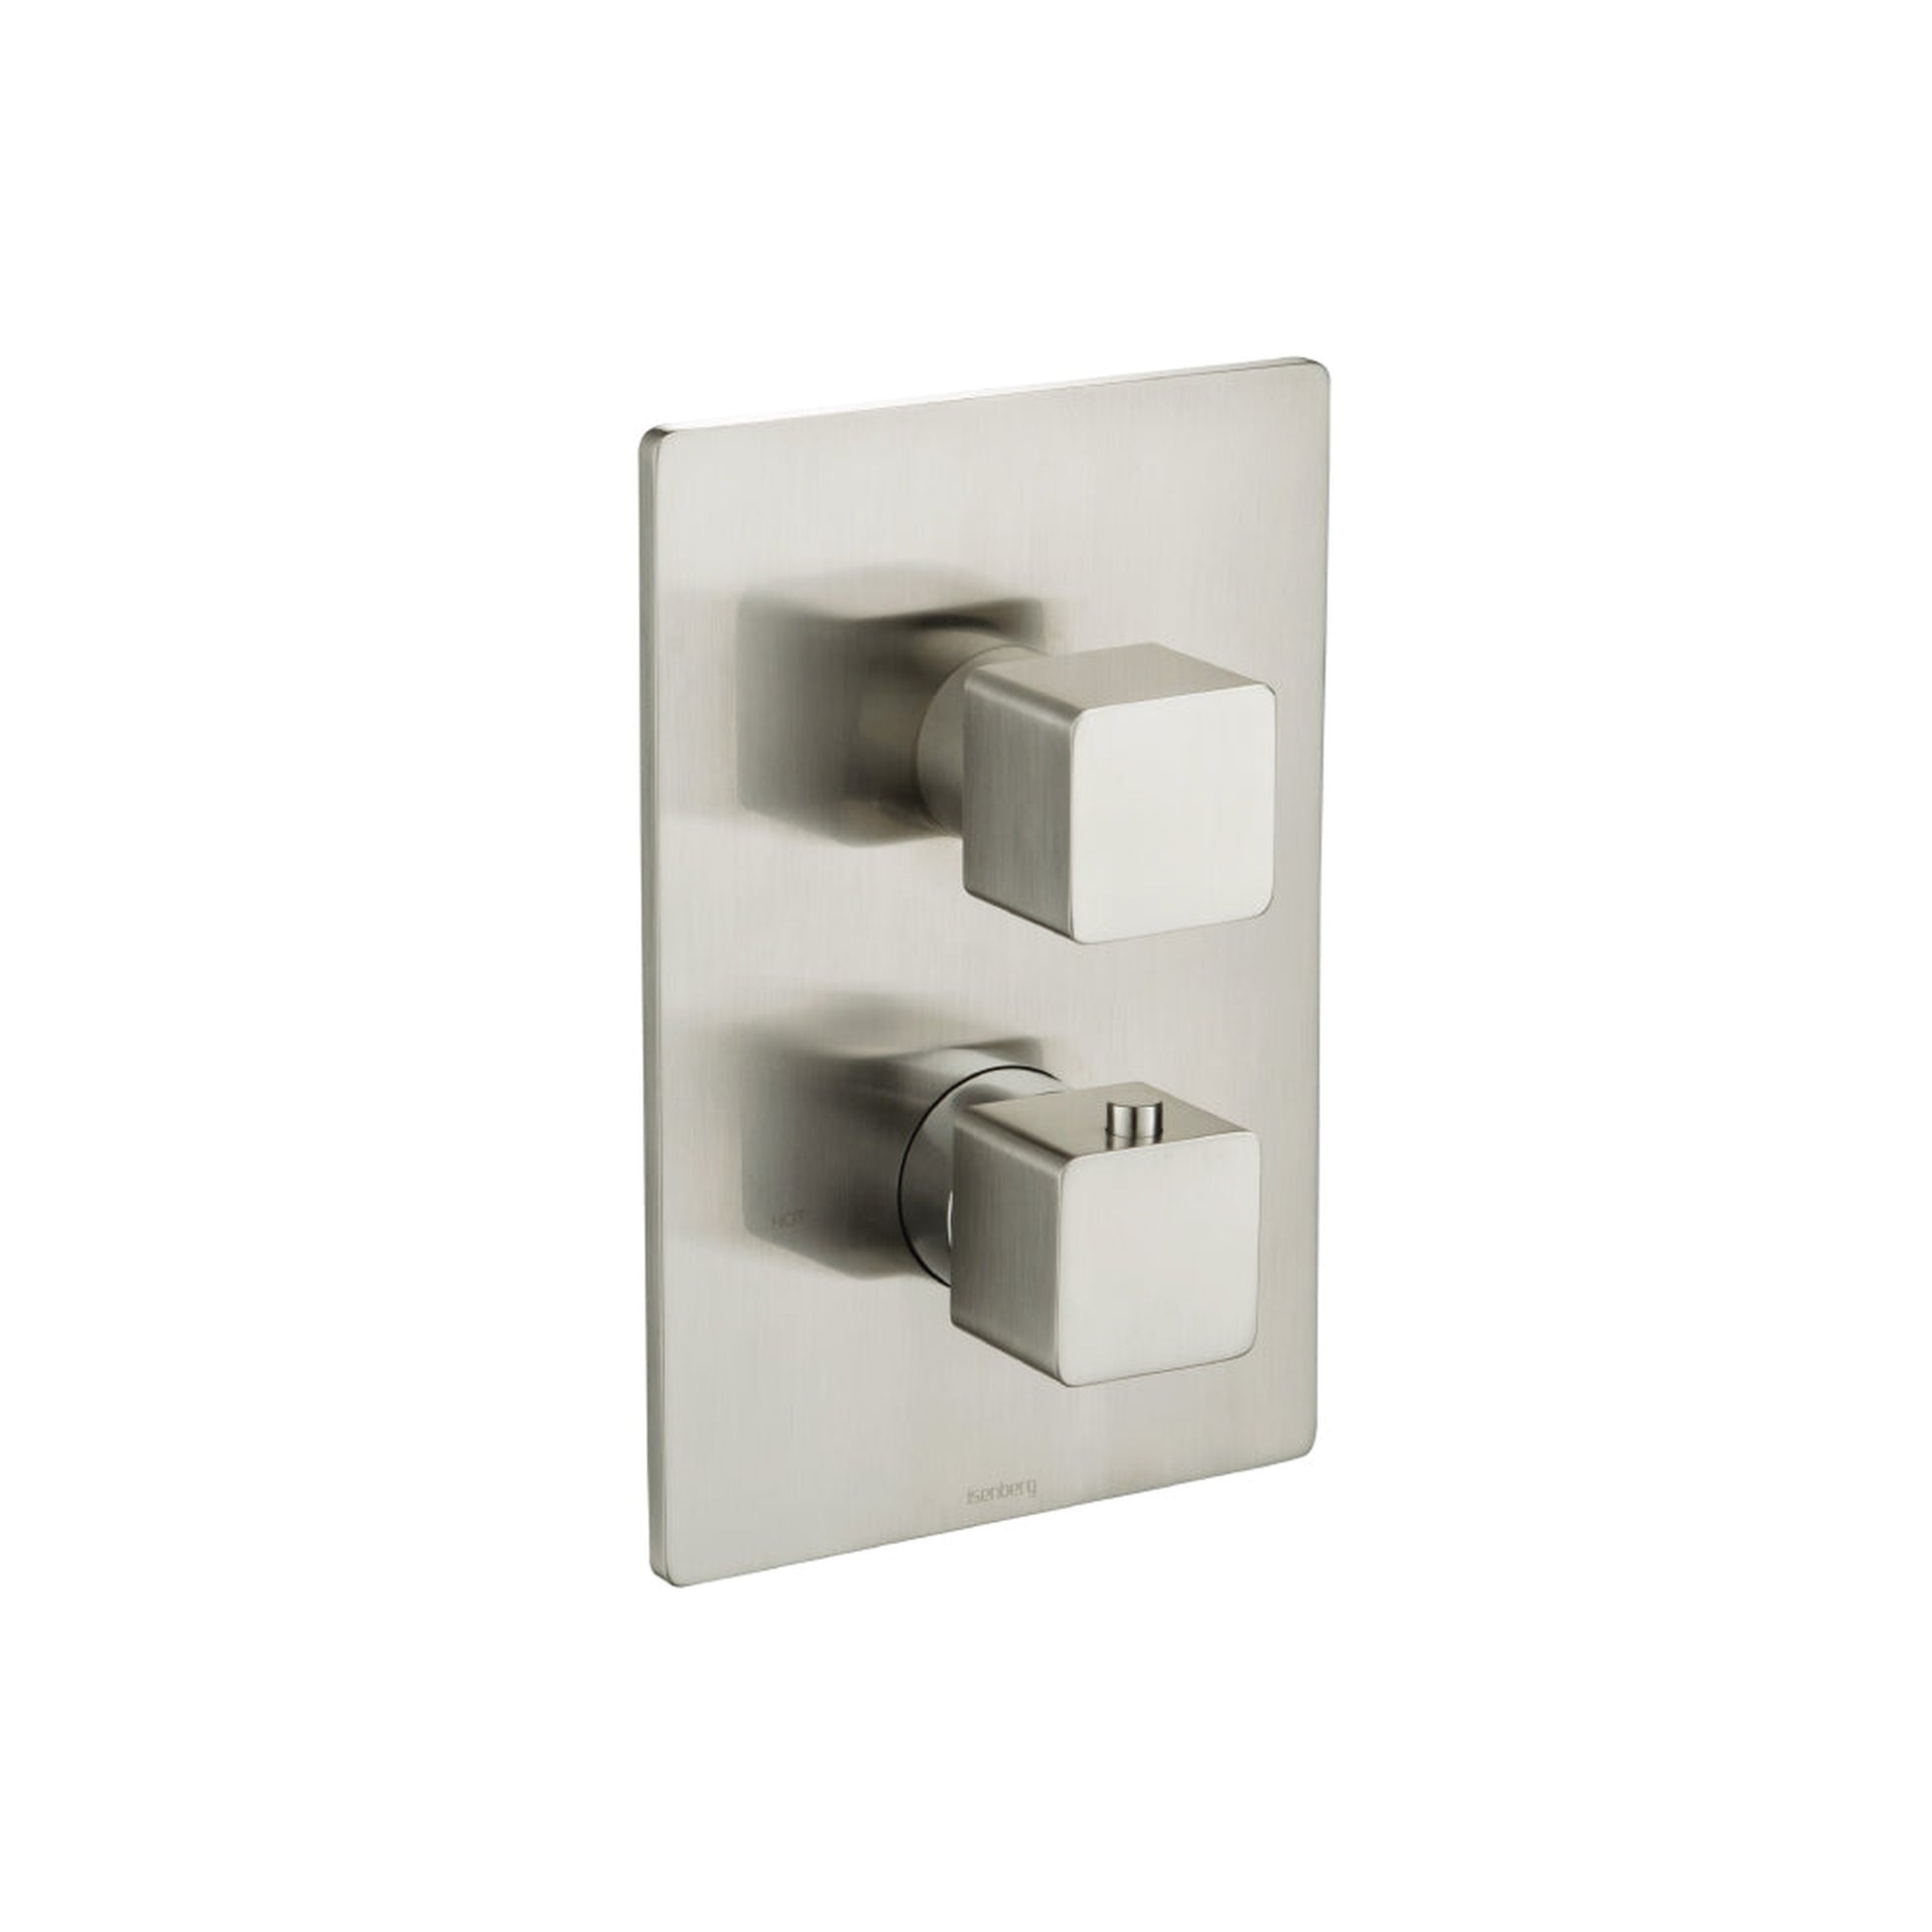 Isenberg Serie 196 Trim for Thermostatic Valve in Brushed Nickel (196.4000TBN)